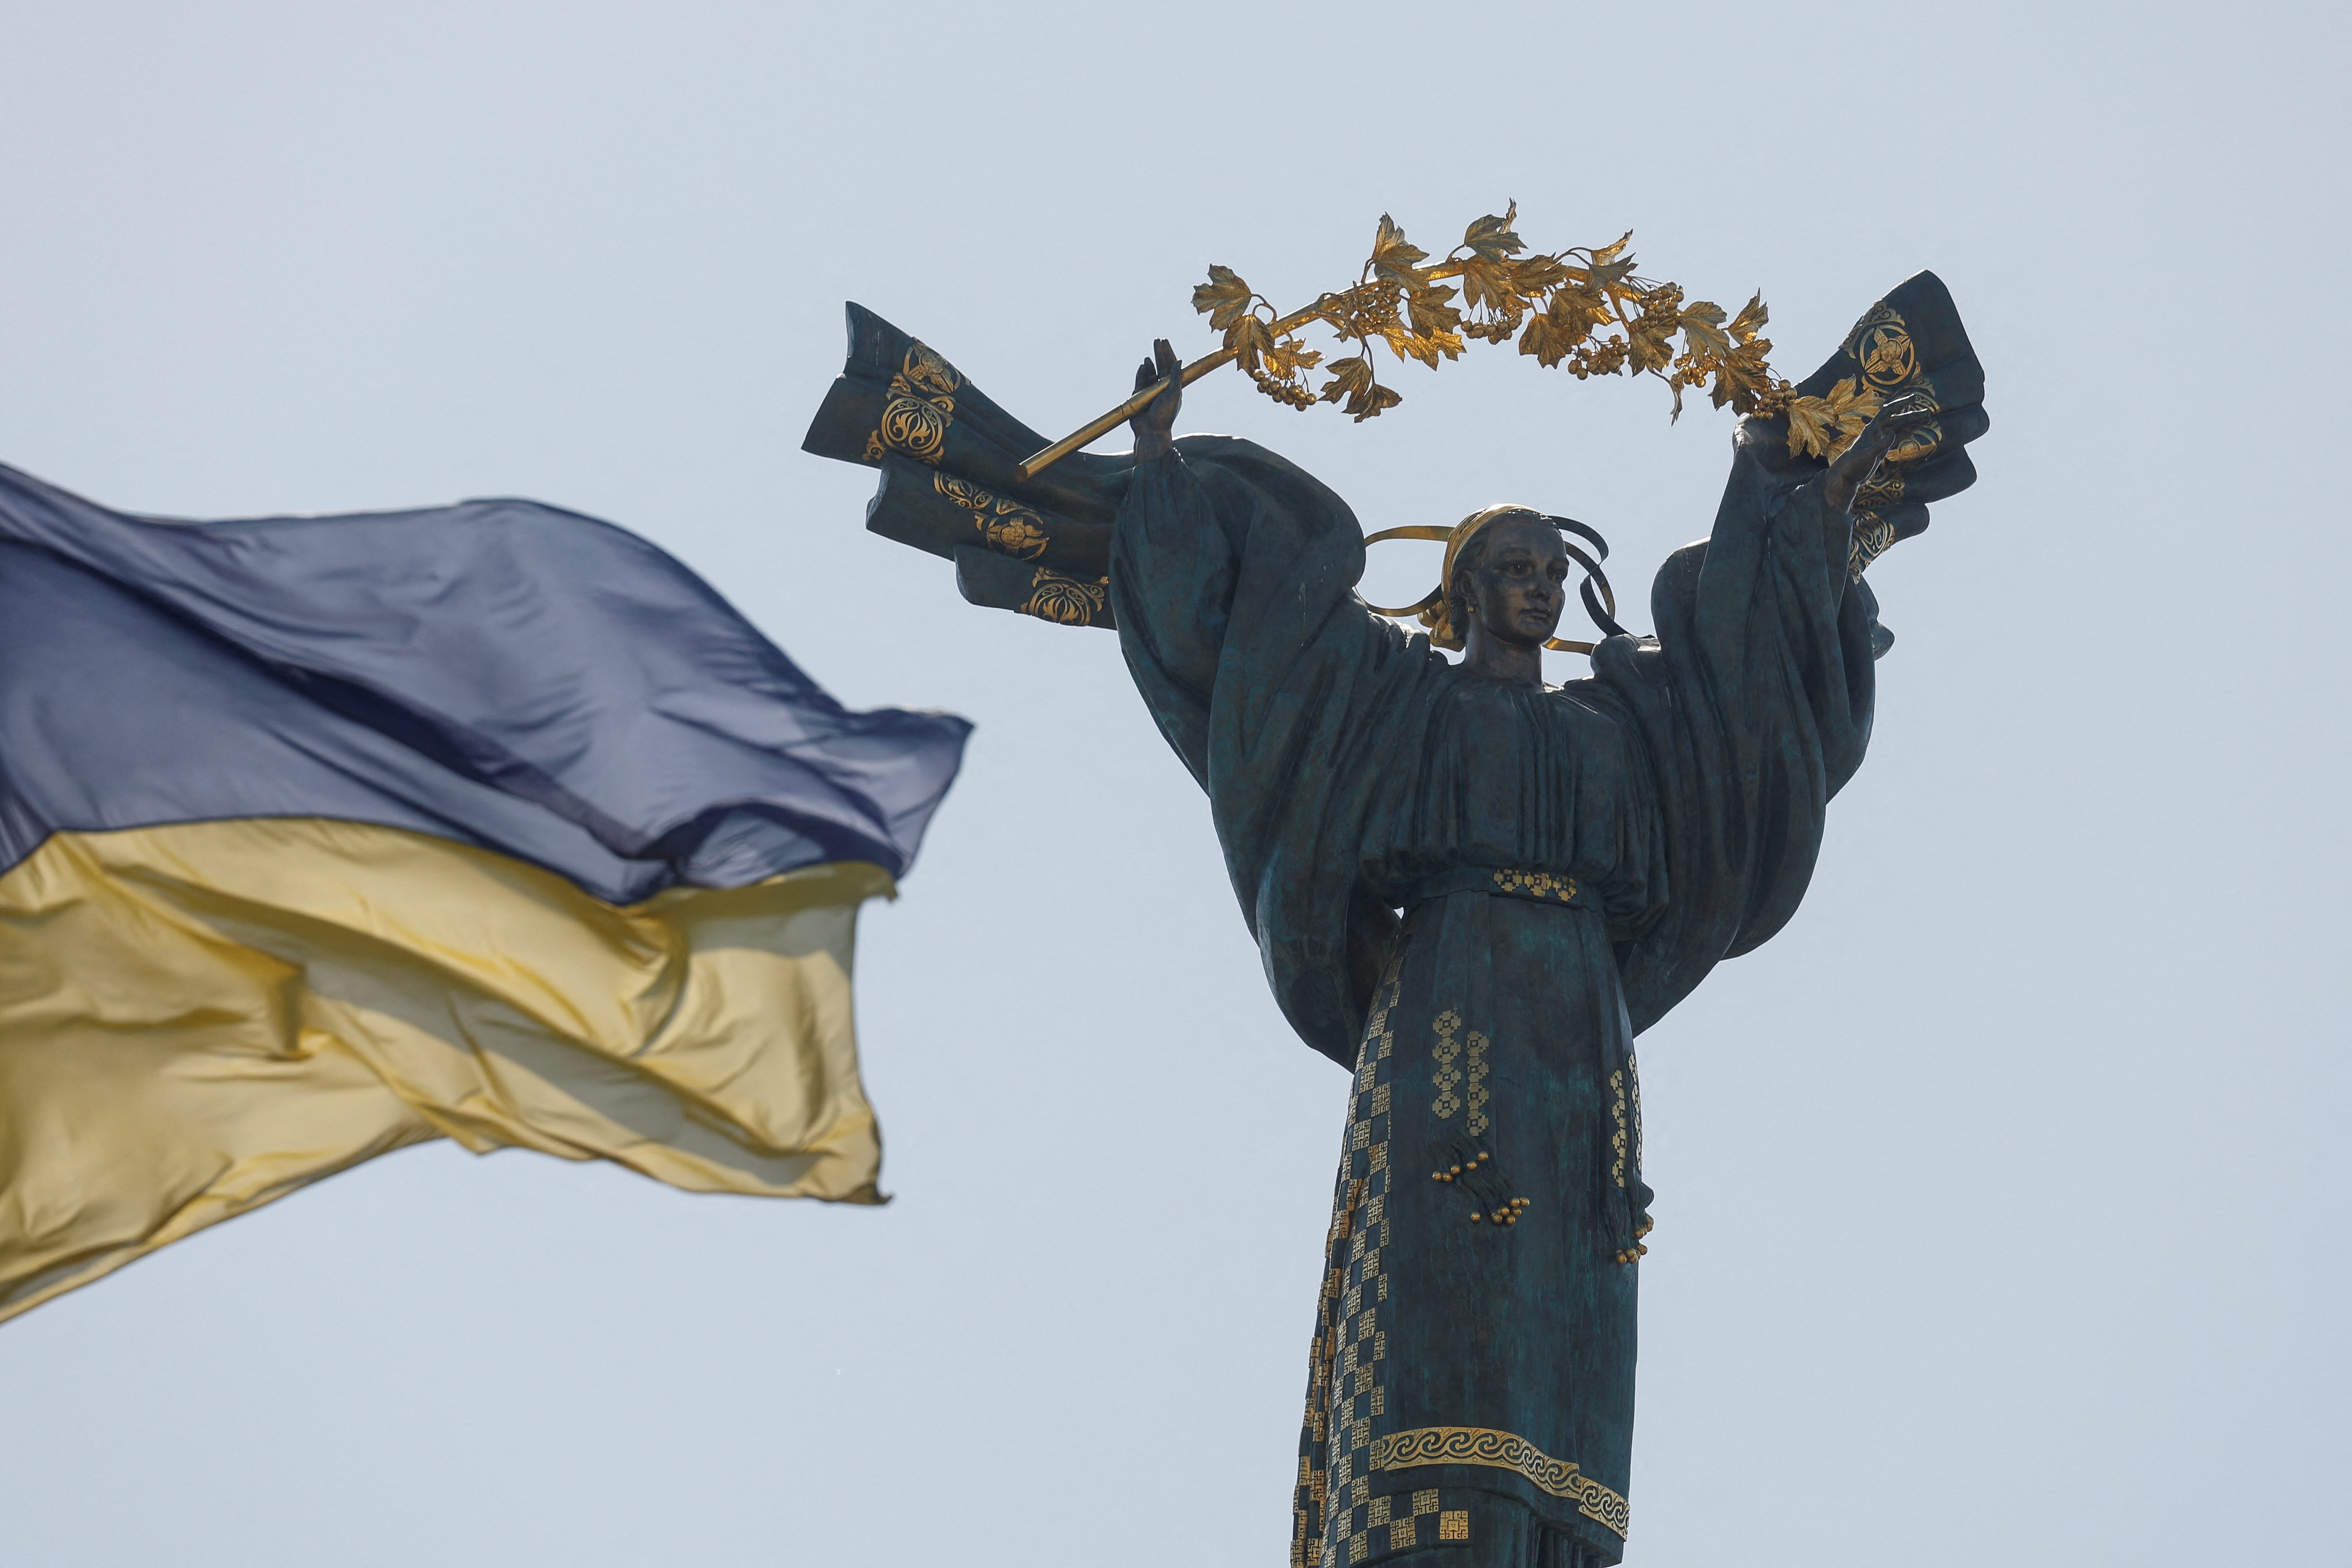 The celebration of the Independence Day in Kyiv